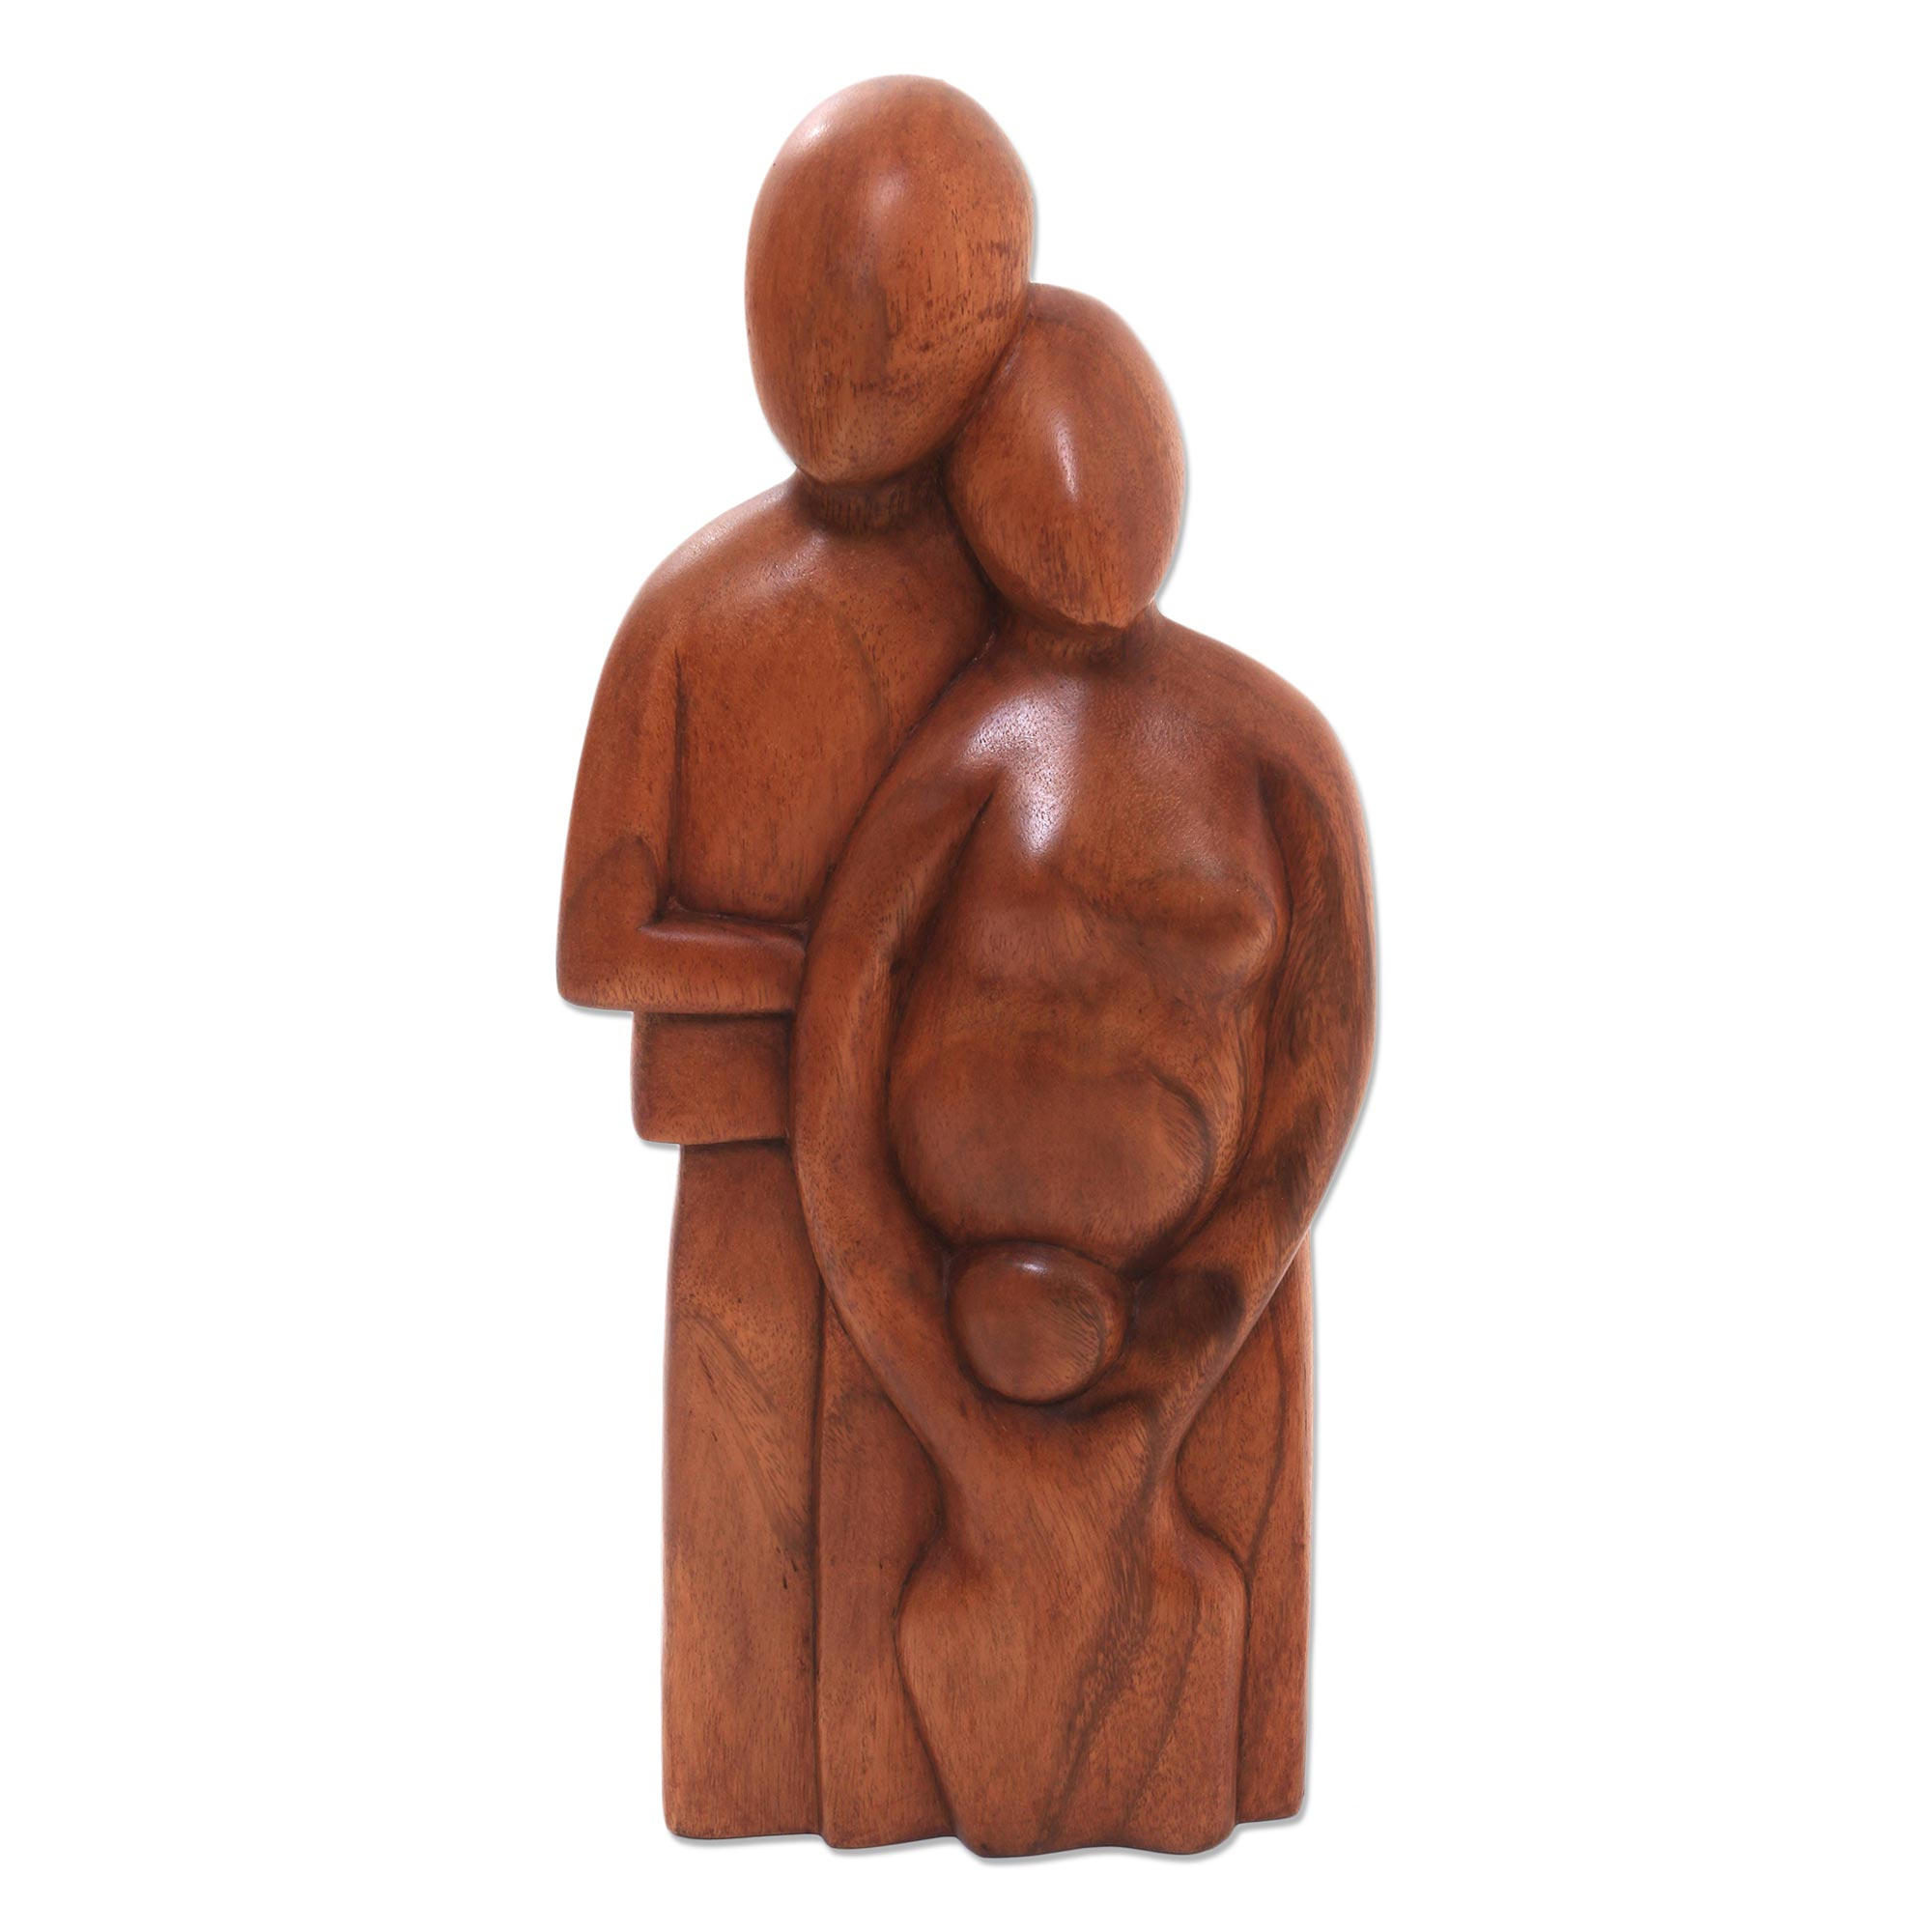 Unique Wood Sculpture from Indonesia - Family Love